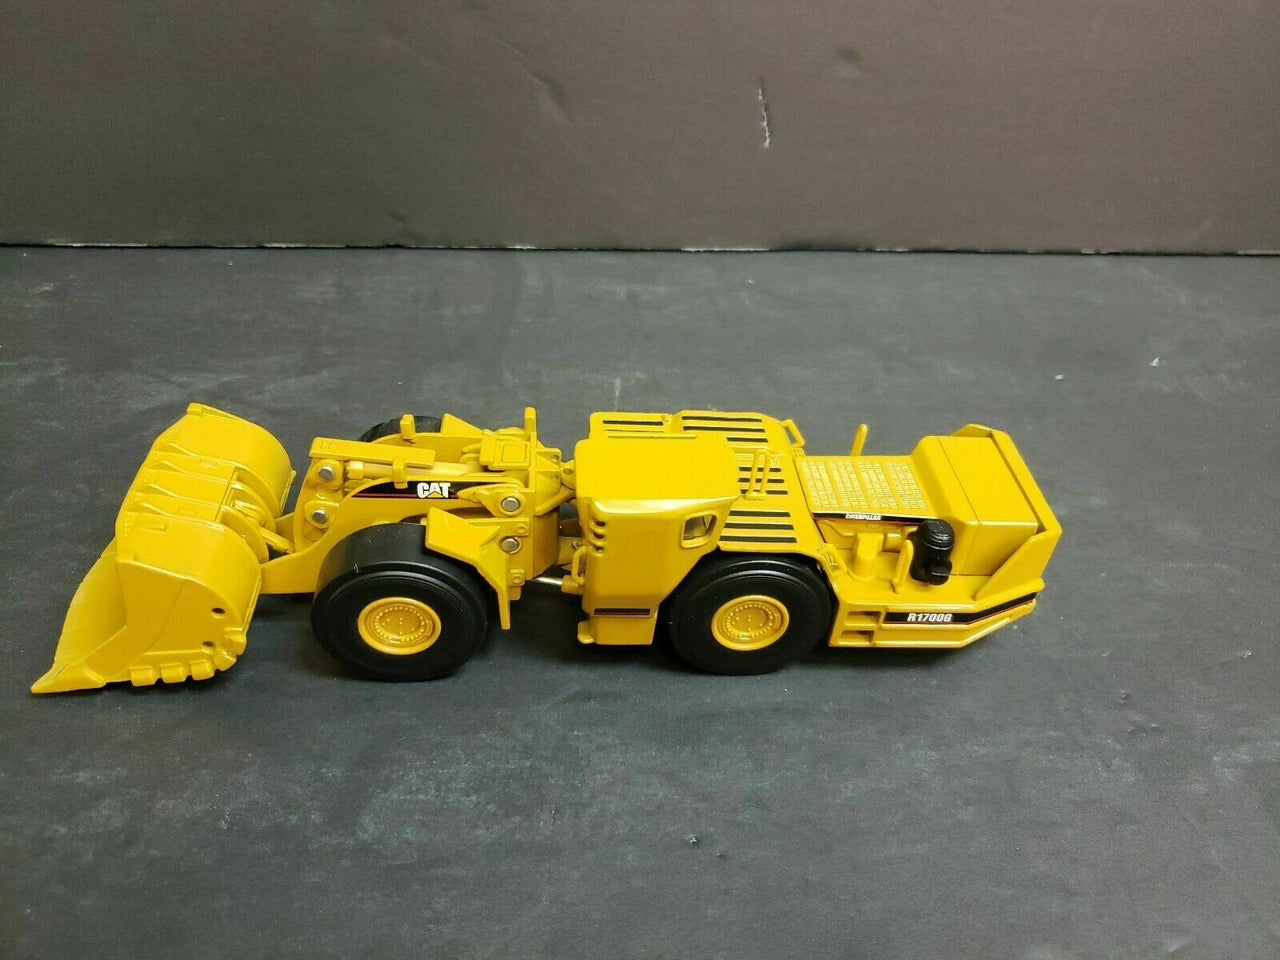 55140 Caterpillar R1700G Low Profile Loader 1:50 Scale (Discontinued Model)